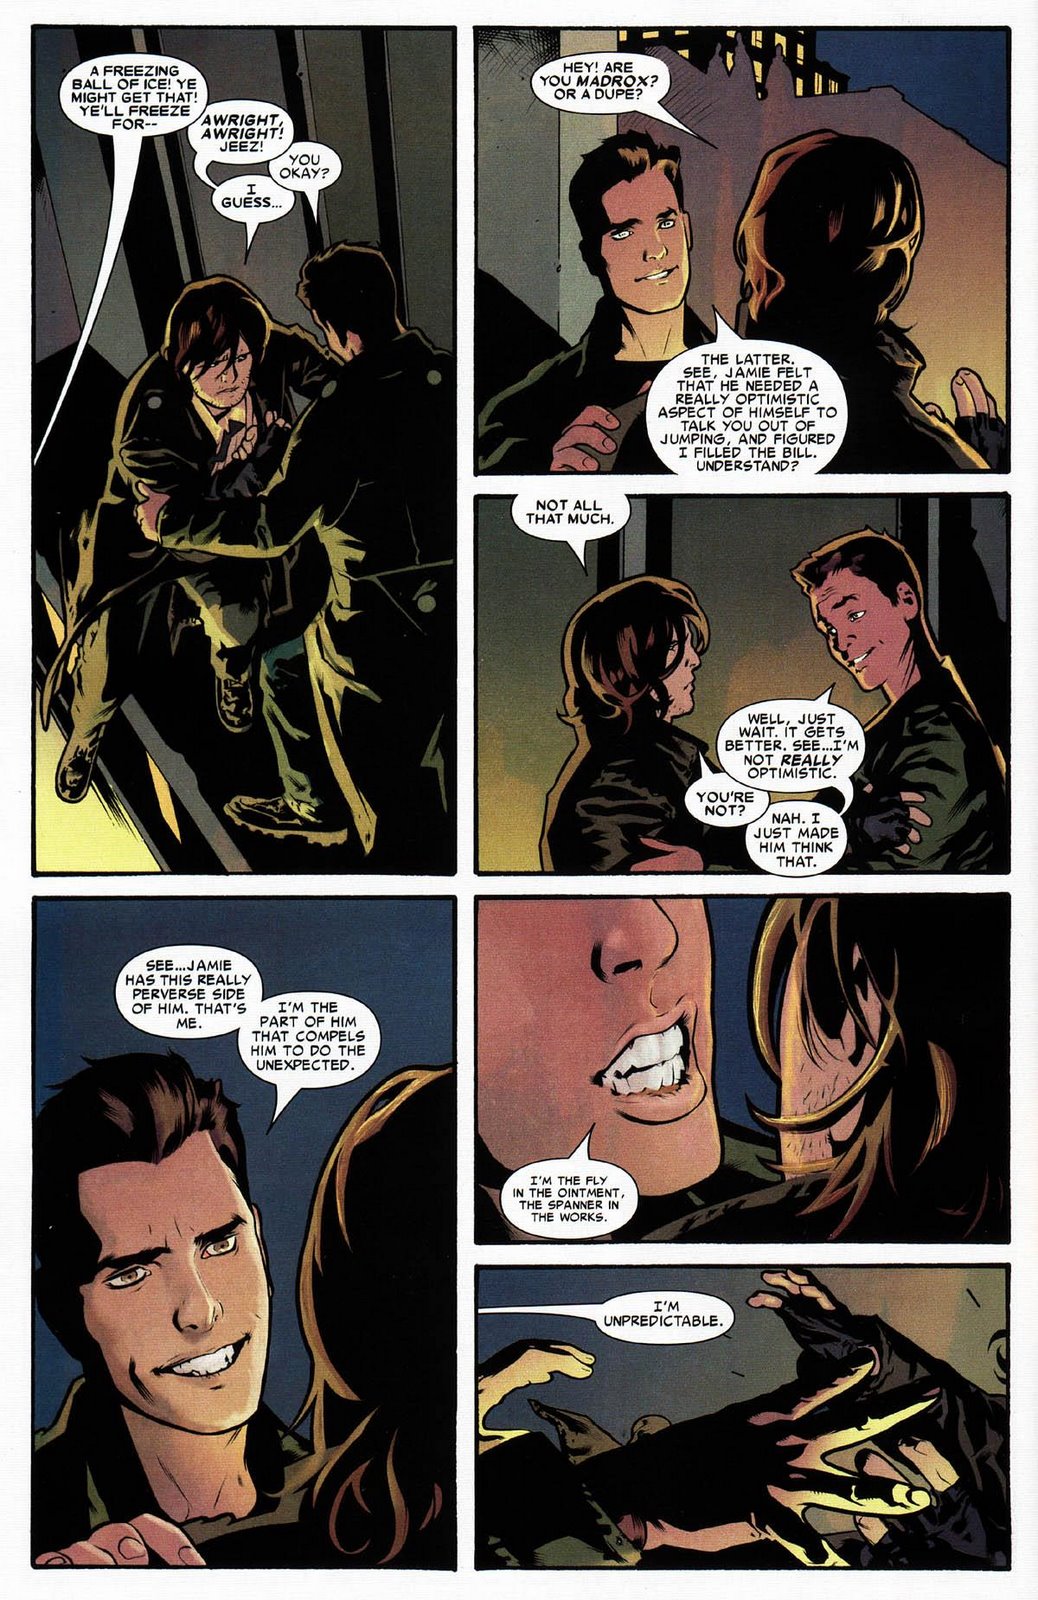 [X-Factor+#1+(2006)+-+Page+32.jpg]